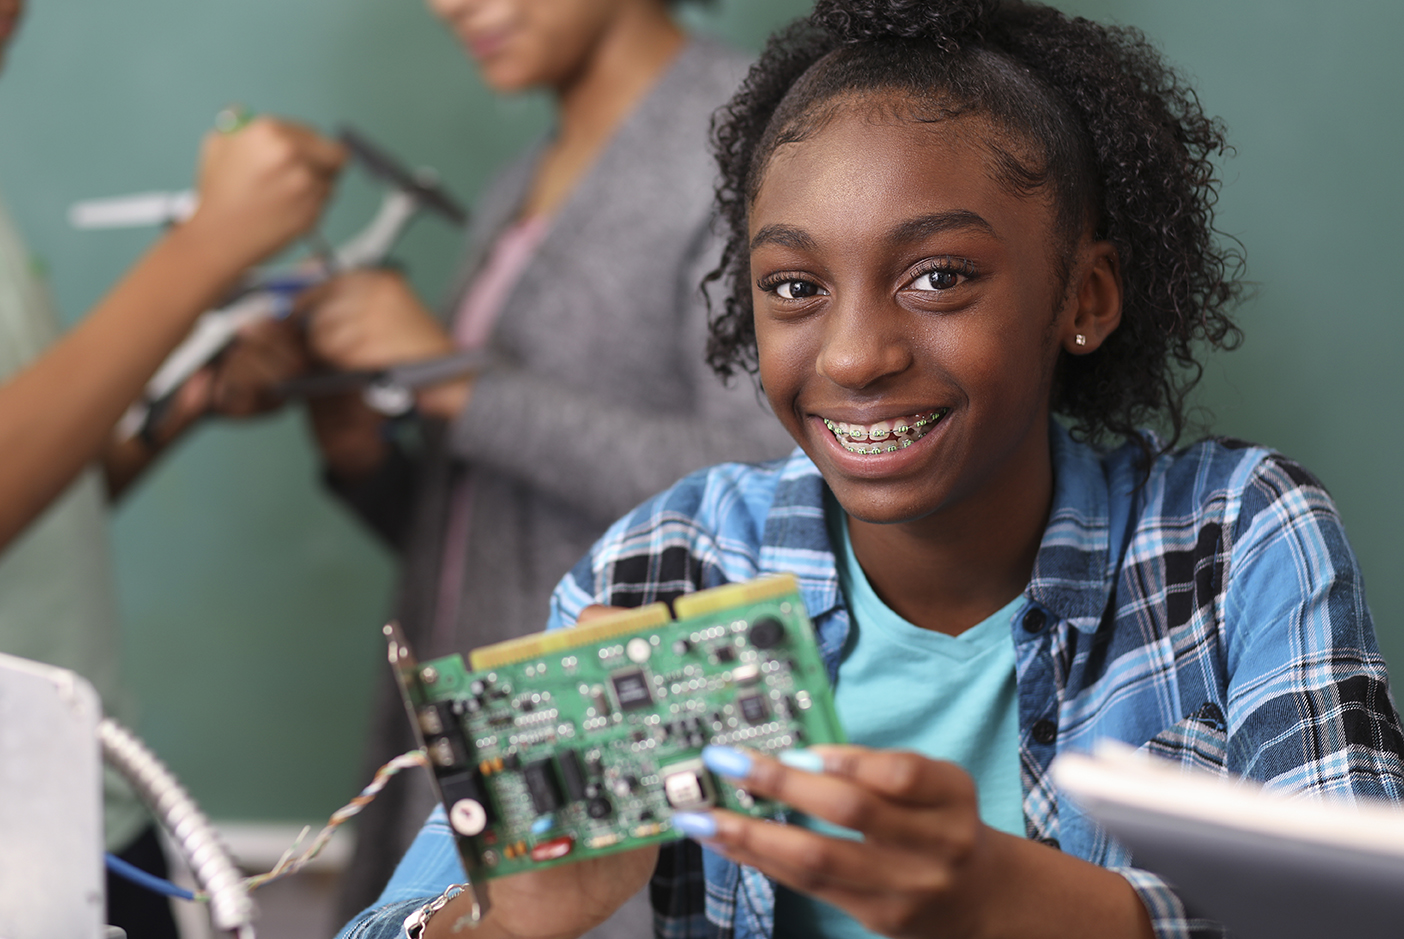 A young student with braces on her teeth smiles at the camera, holding a green circuit board as she participates in a robotics or electronics class, with another student working in the background. The focus is on hands-on STEM education and the joy of learning.